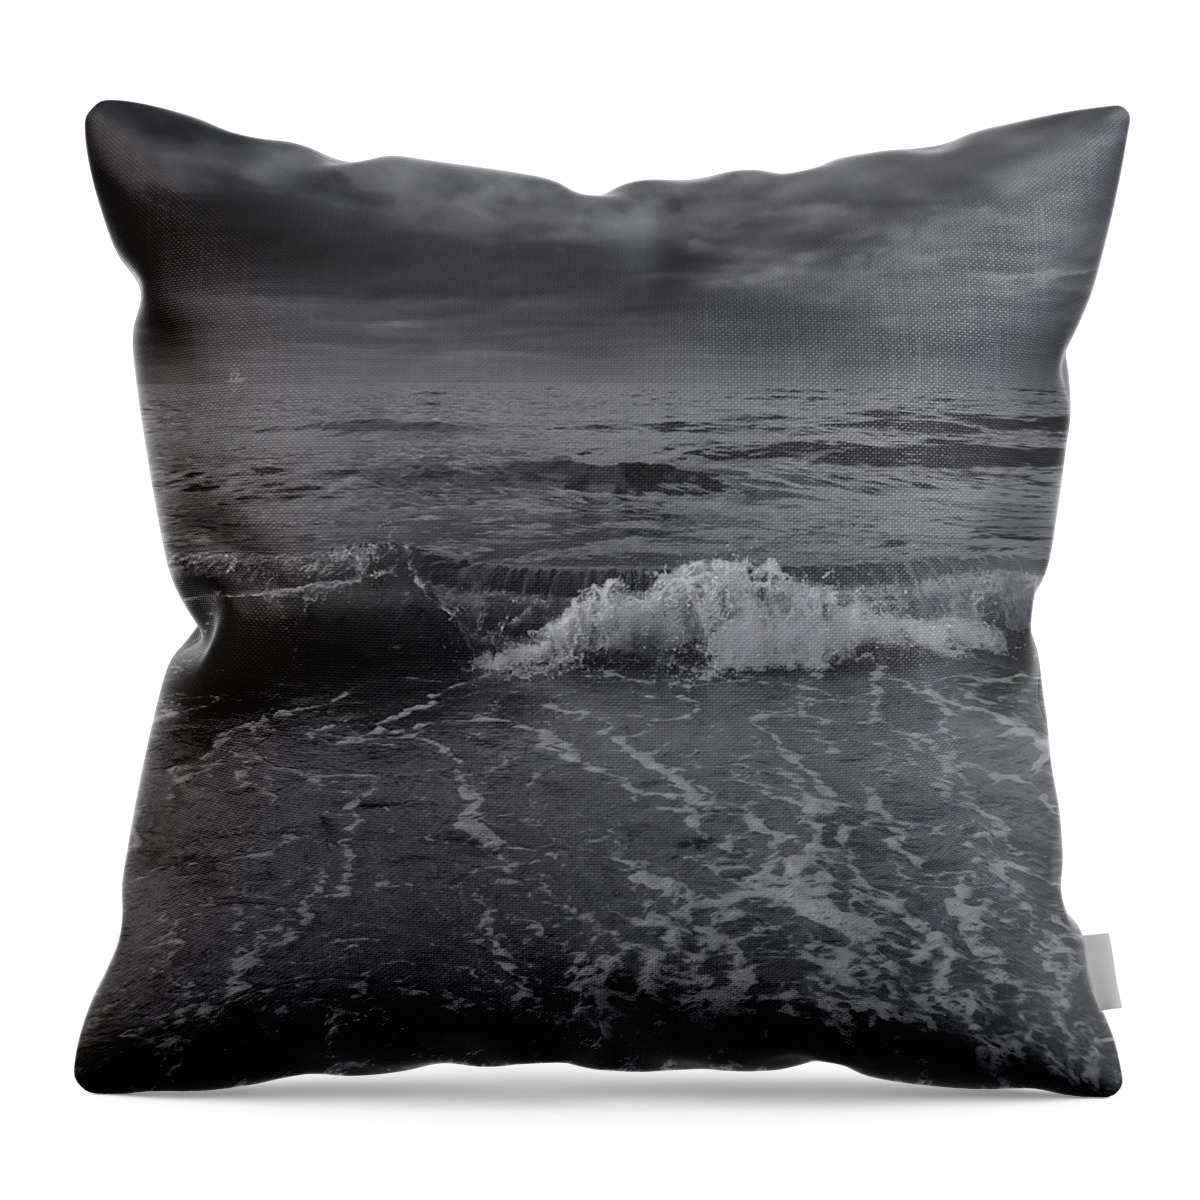 Ocean Wave Throw Pillow featuring the photograph Black and White Ocean Wave 2014 by Darius Aniunas